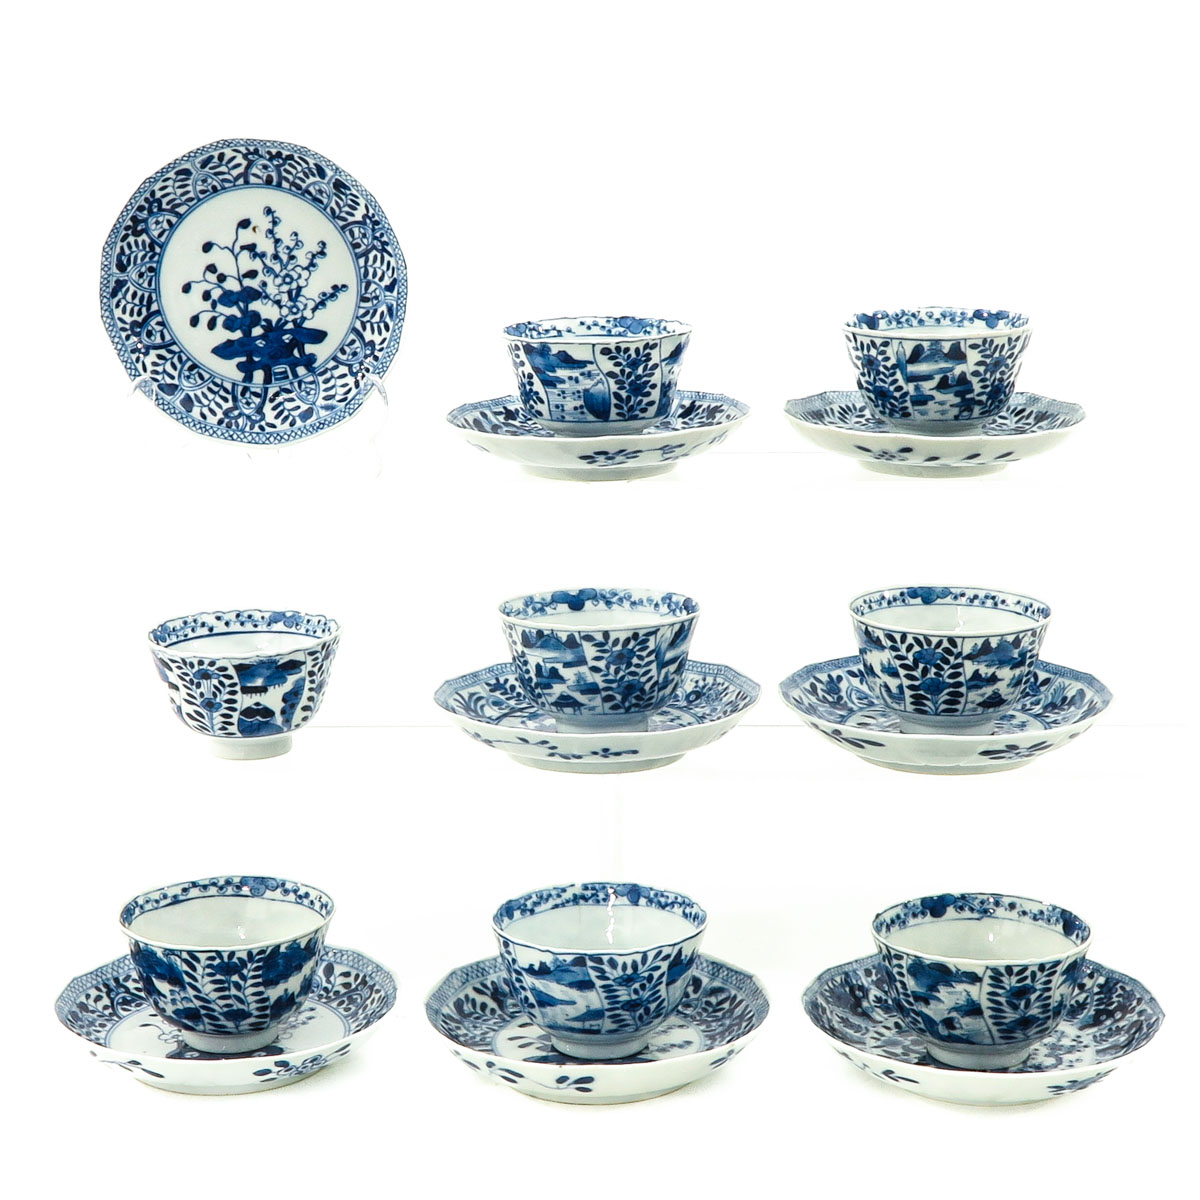 A Series of 8 Cups and Saucers